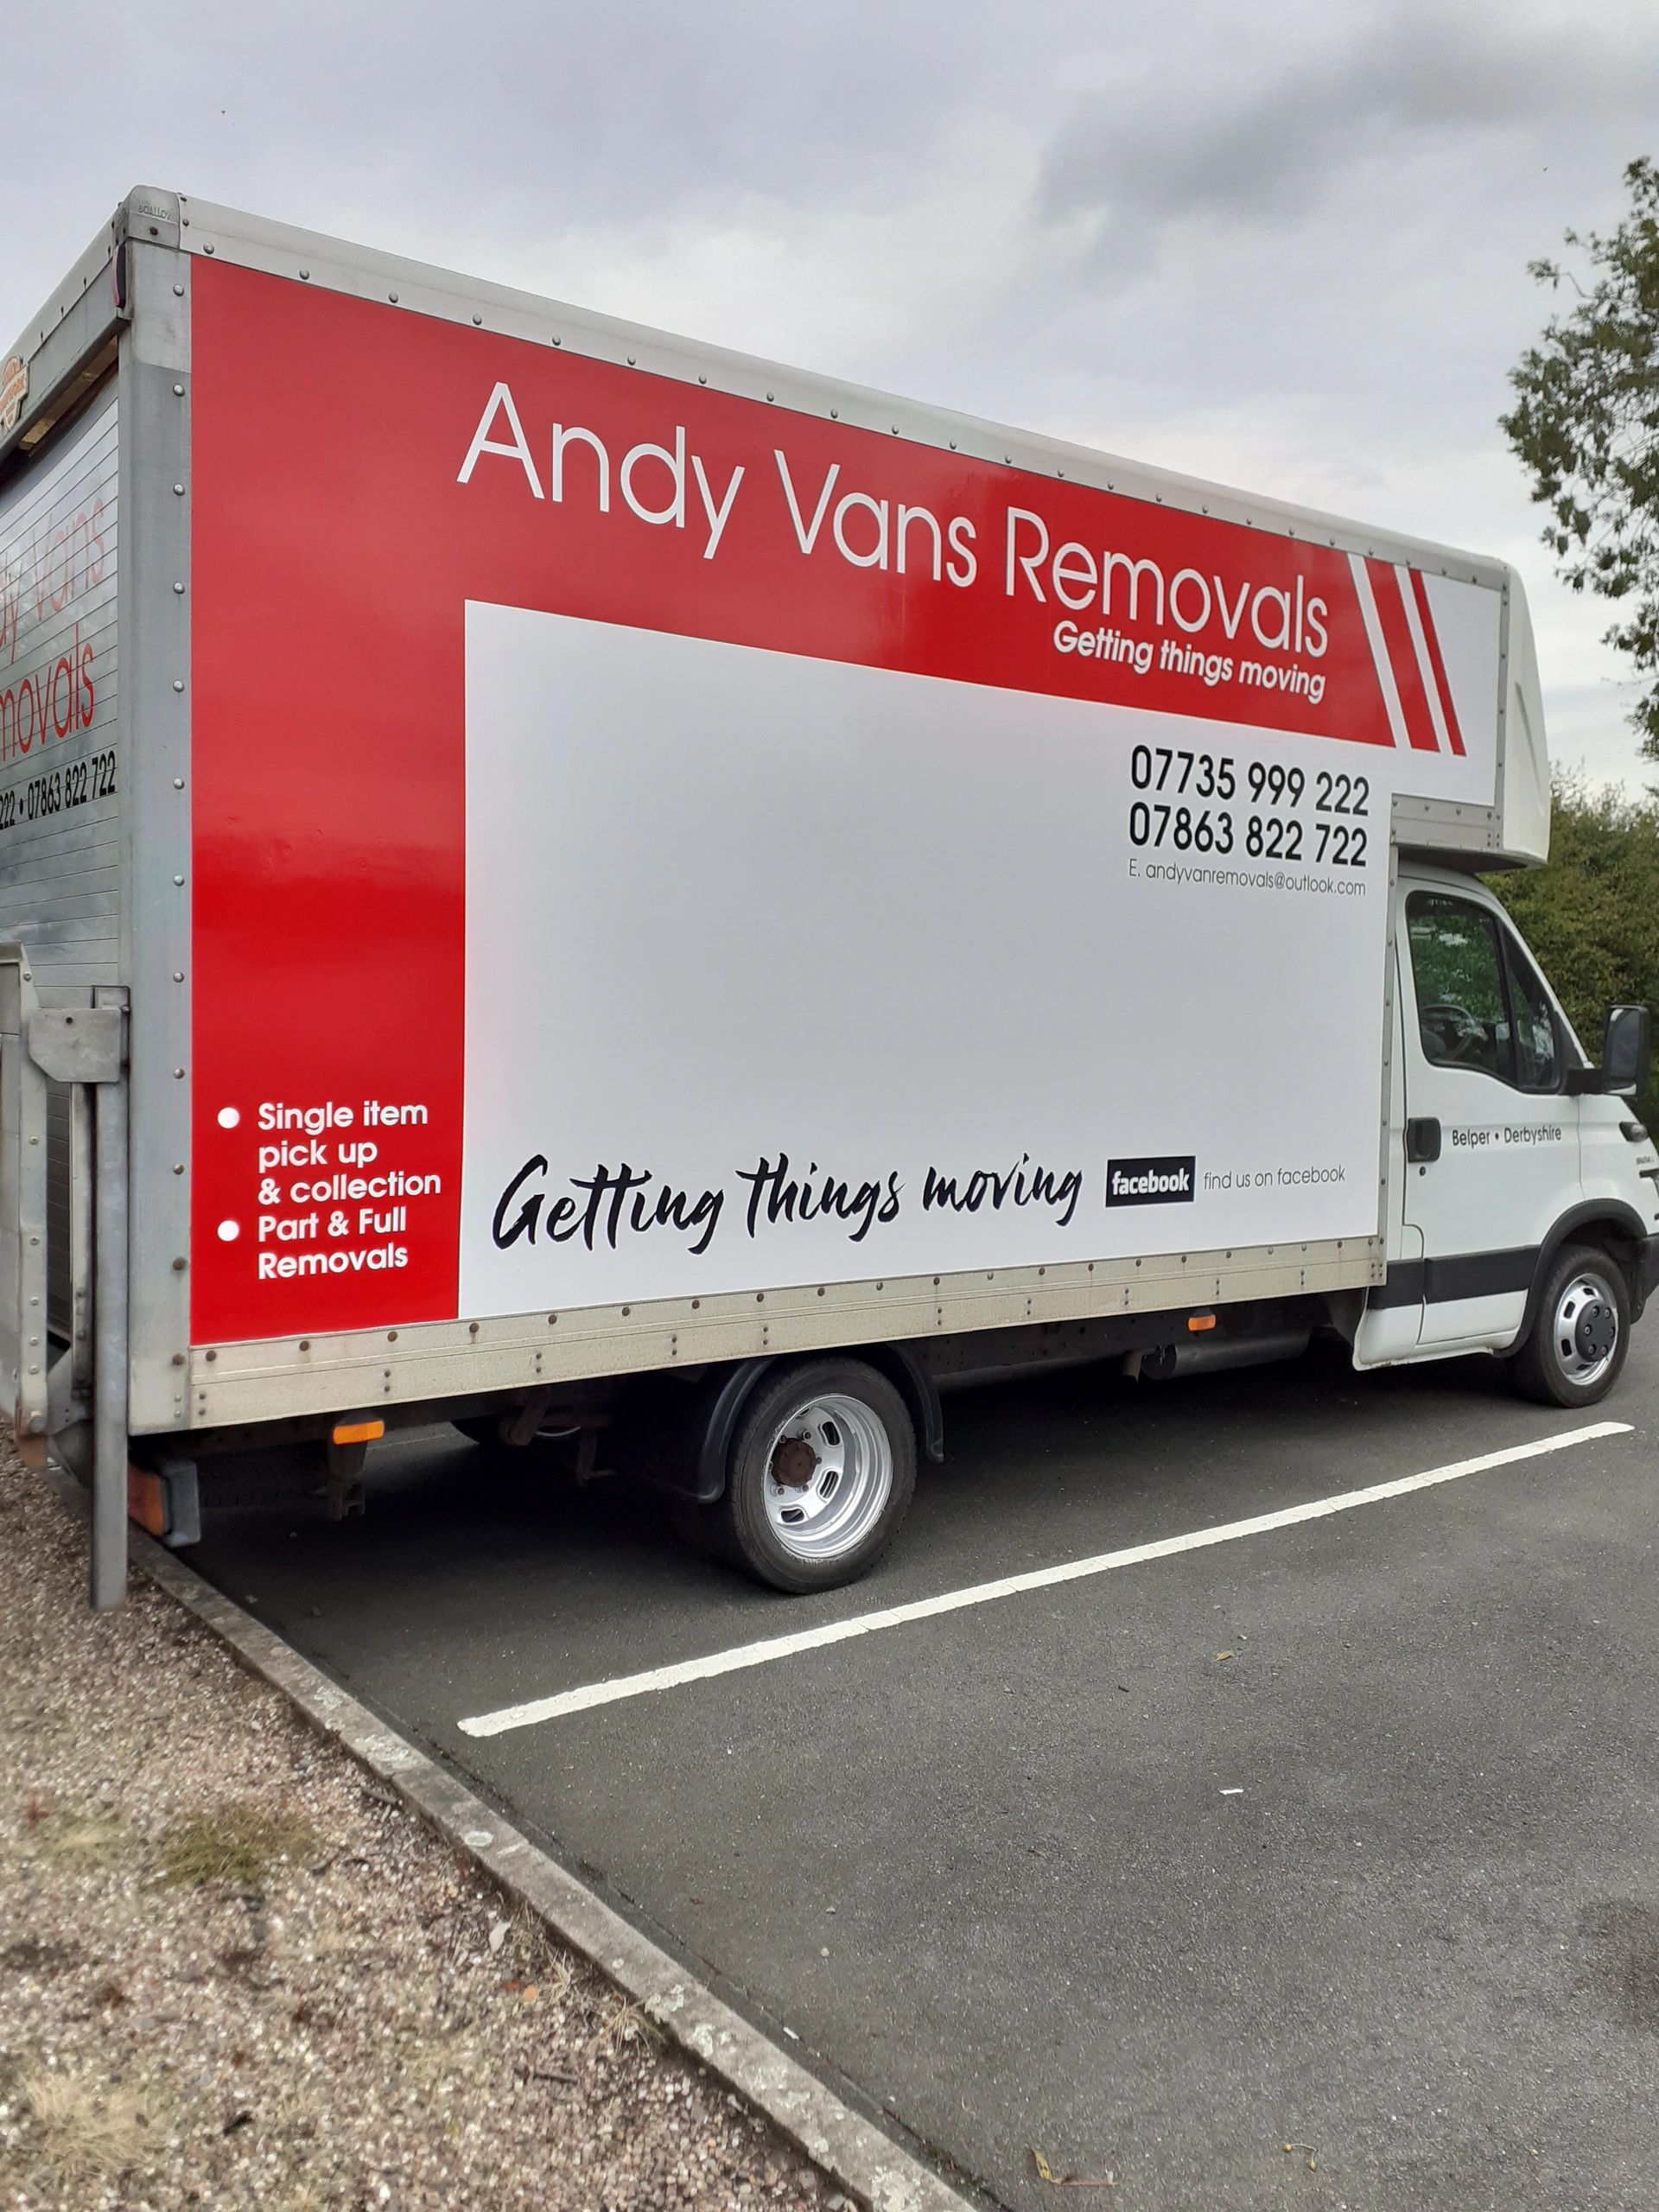 House Moves, Home Moves, Man and Van Service. - Andy Vans Removals